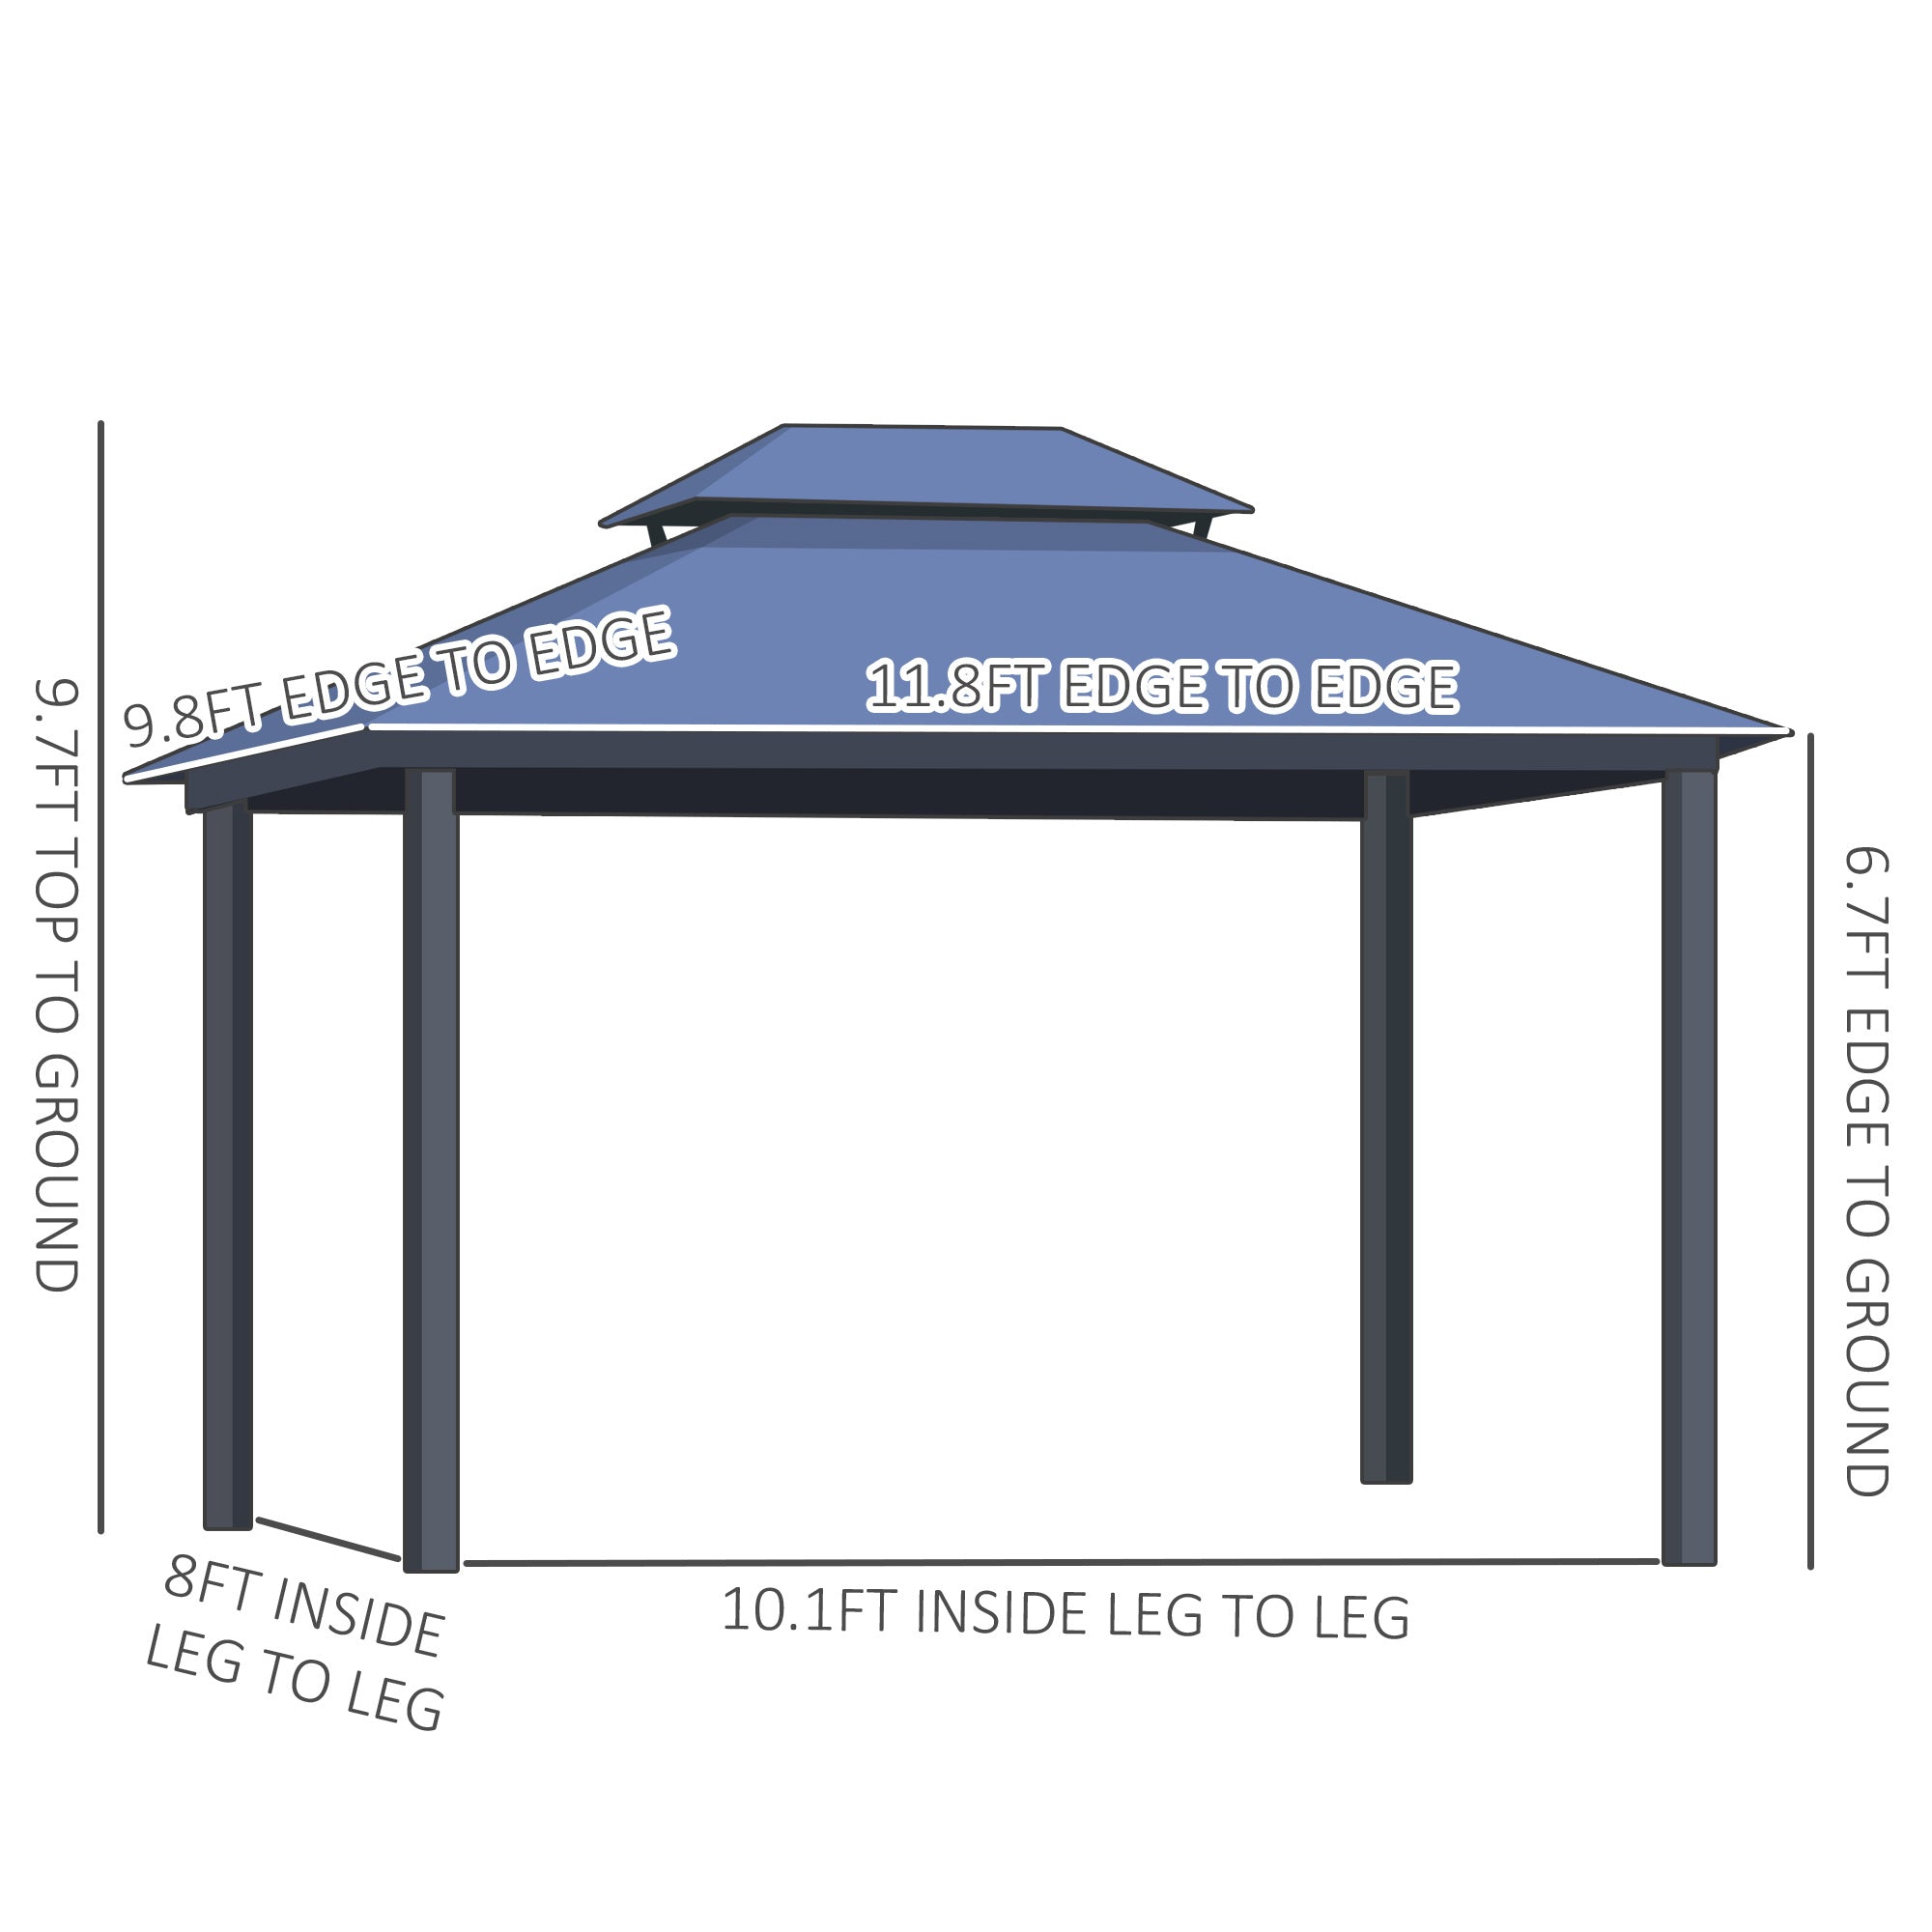 10'x12' Hardtop Gazebo Canopy with Polycarbonate Double Roof, Aluminum Frame, Permanent Pavilion Outdoor Gazebo with Netting and Curtains for Patio, Garden, Backyard, Deck, Lawn - Gray